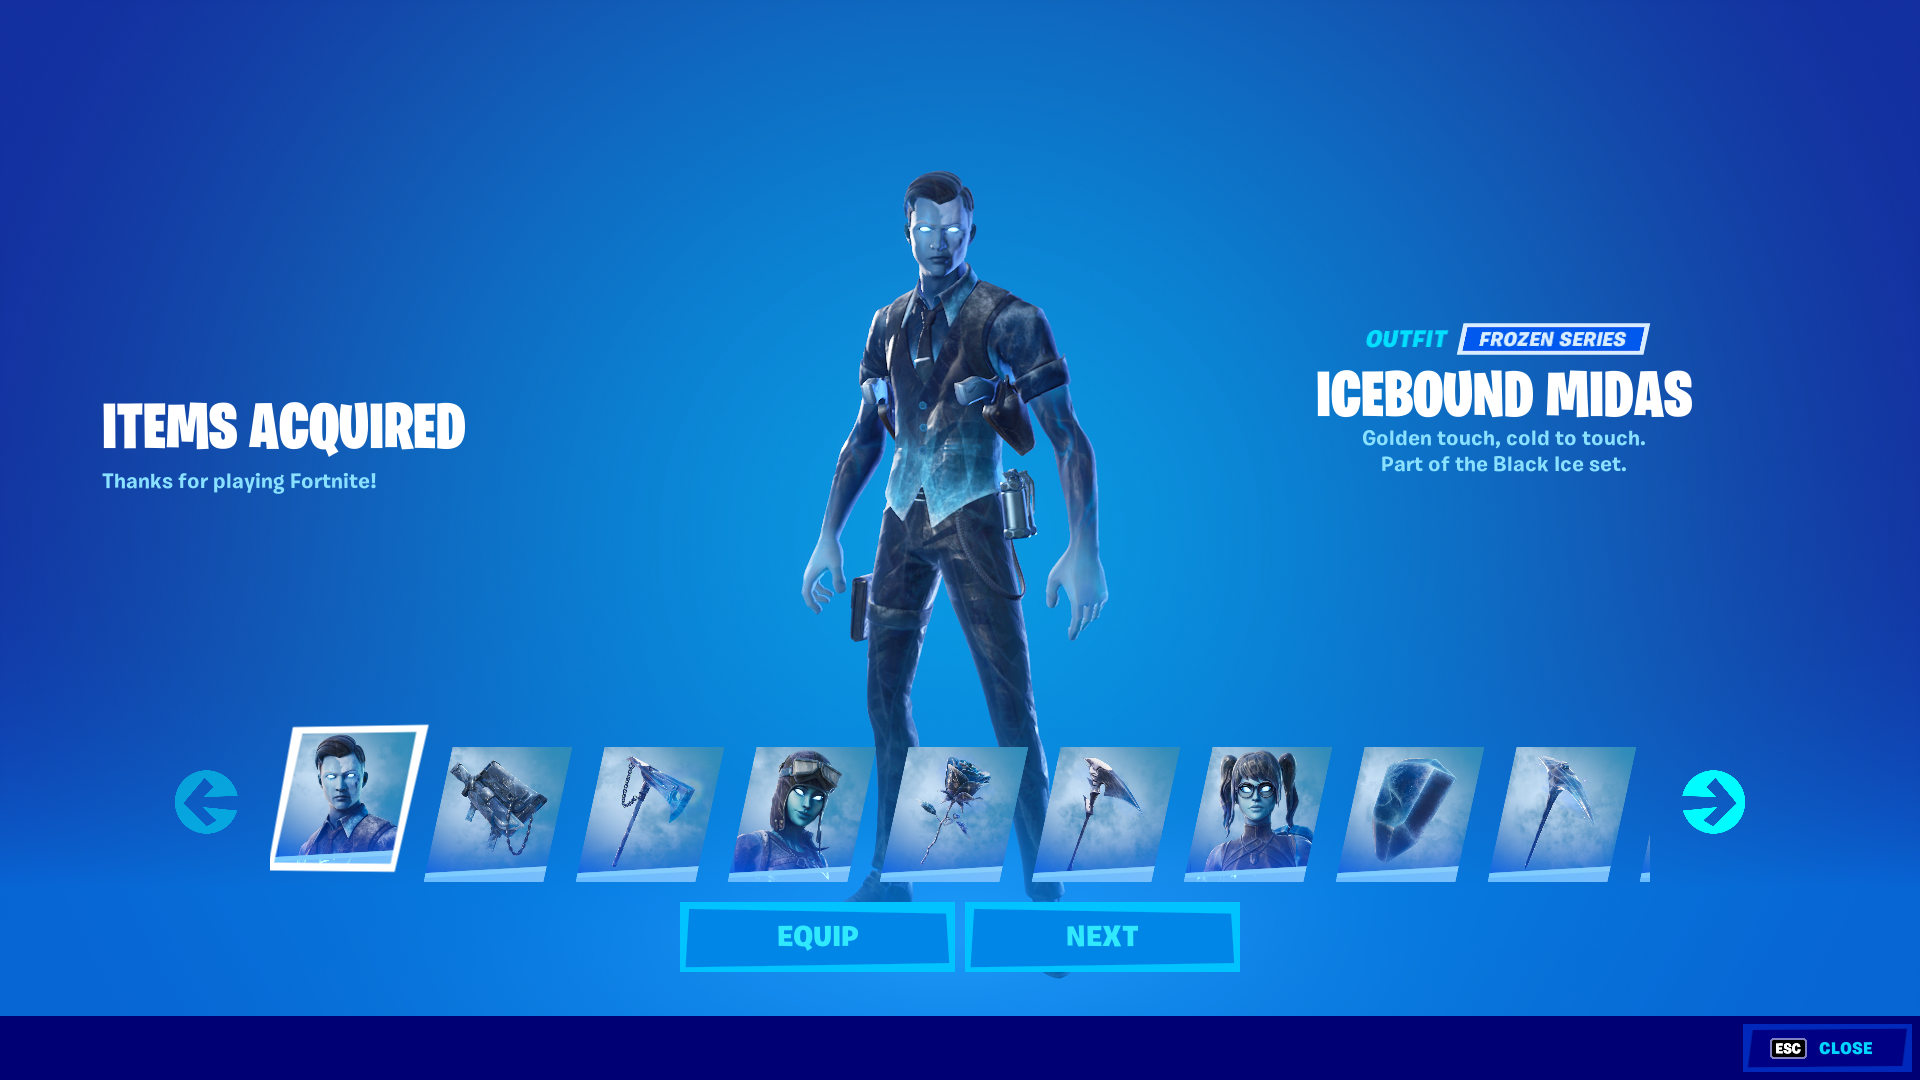 The new Black Ice Legends Pack is now available